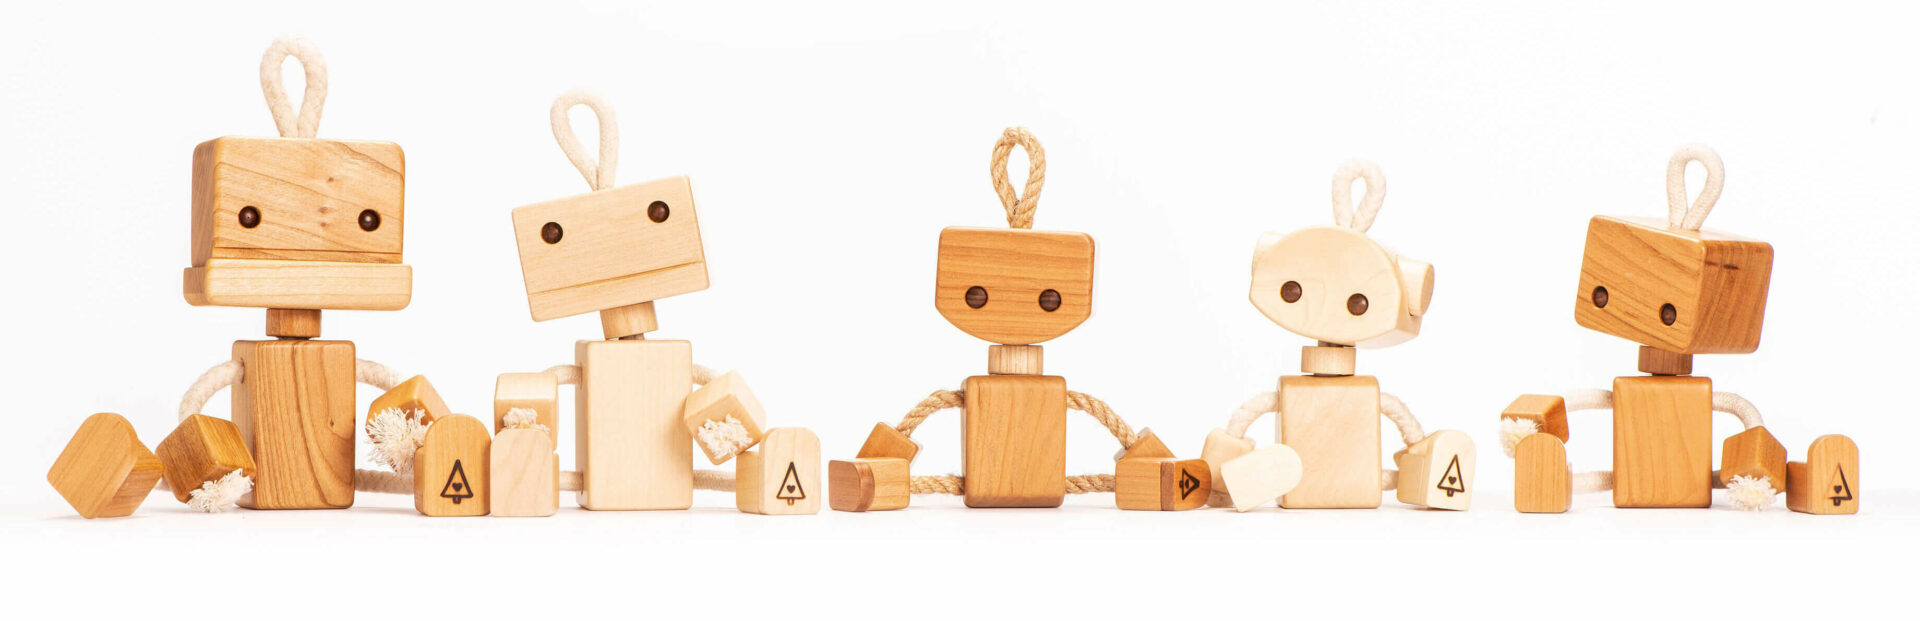 Wooden robots family